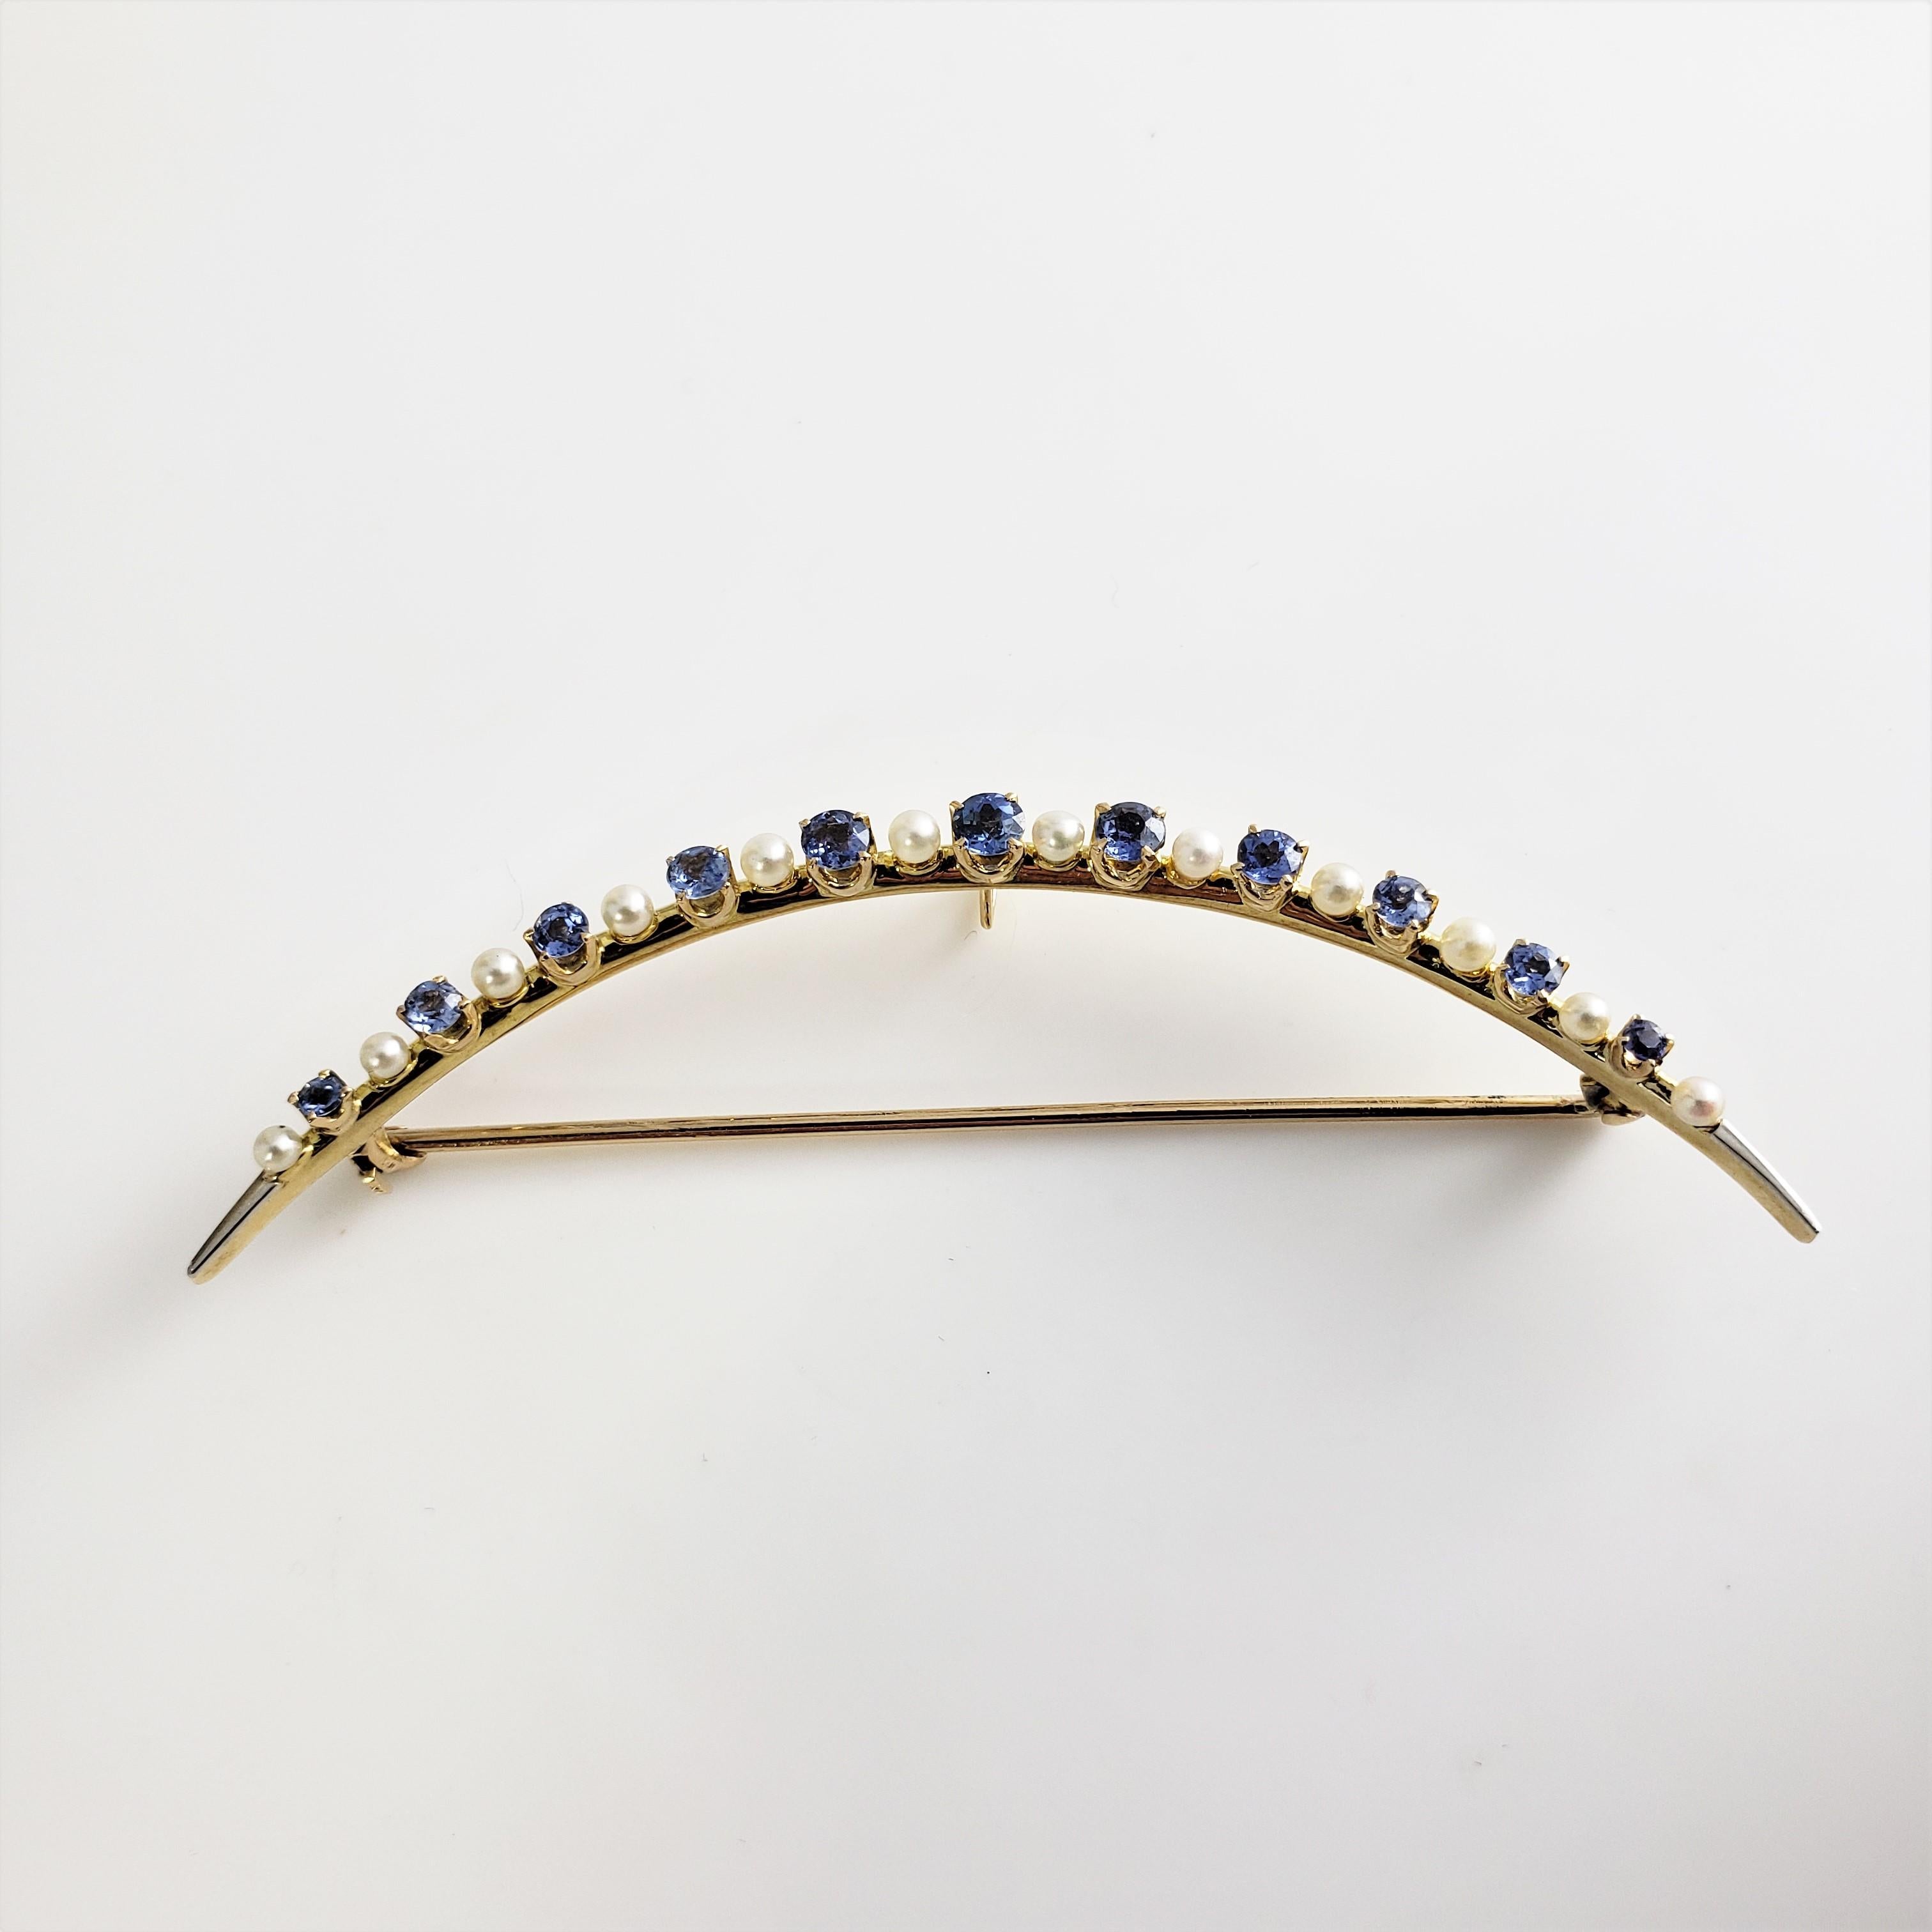 14 Karat Yellow Gold Blue Zircon and Pearl Crescent Moon Brooch/Pin GAI Certified-

This stunning crescent moon pin features 11 blue zircon stones and 12 white pearls (3 mm each) set in beautifully detailed 14K yellow gold.  Width:  3 mm.

Size: 